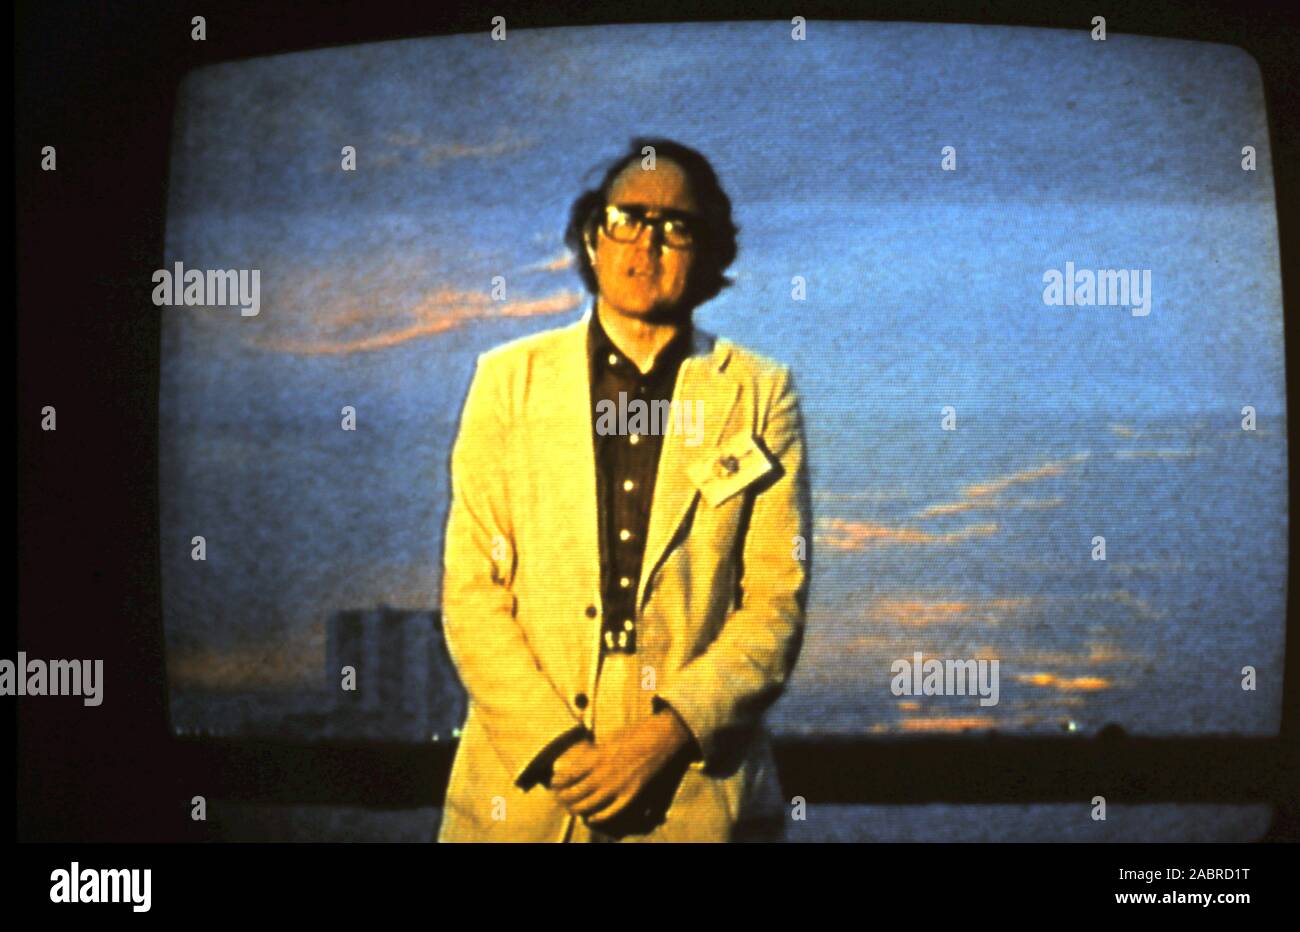 Teleclip - James Burke Apollo 17 - taken directly from color TV screen during live broadcast in the UK - 1972 Stock Photo